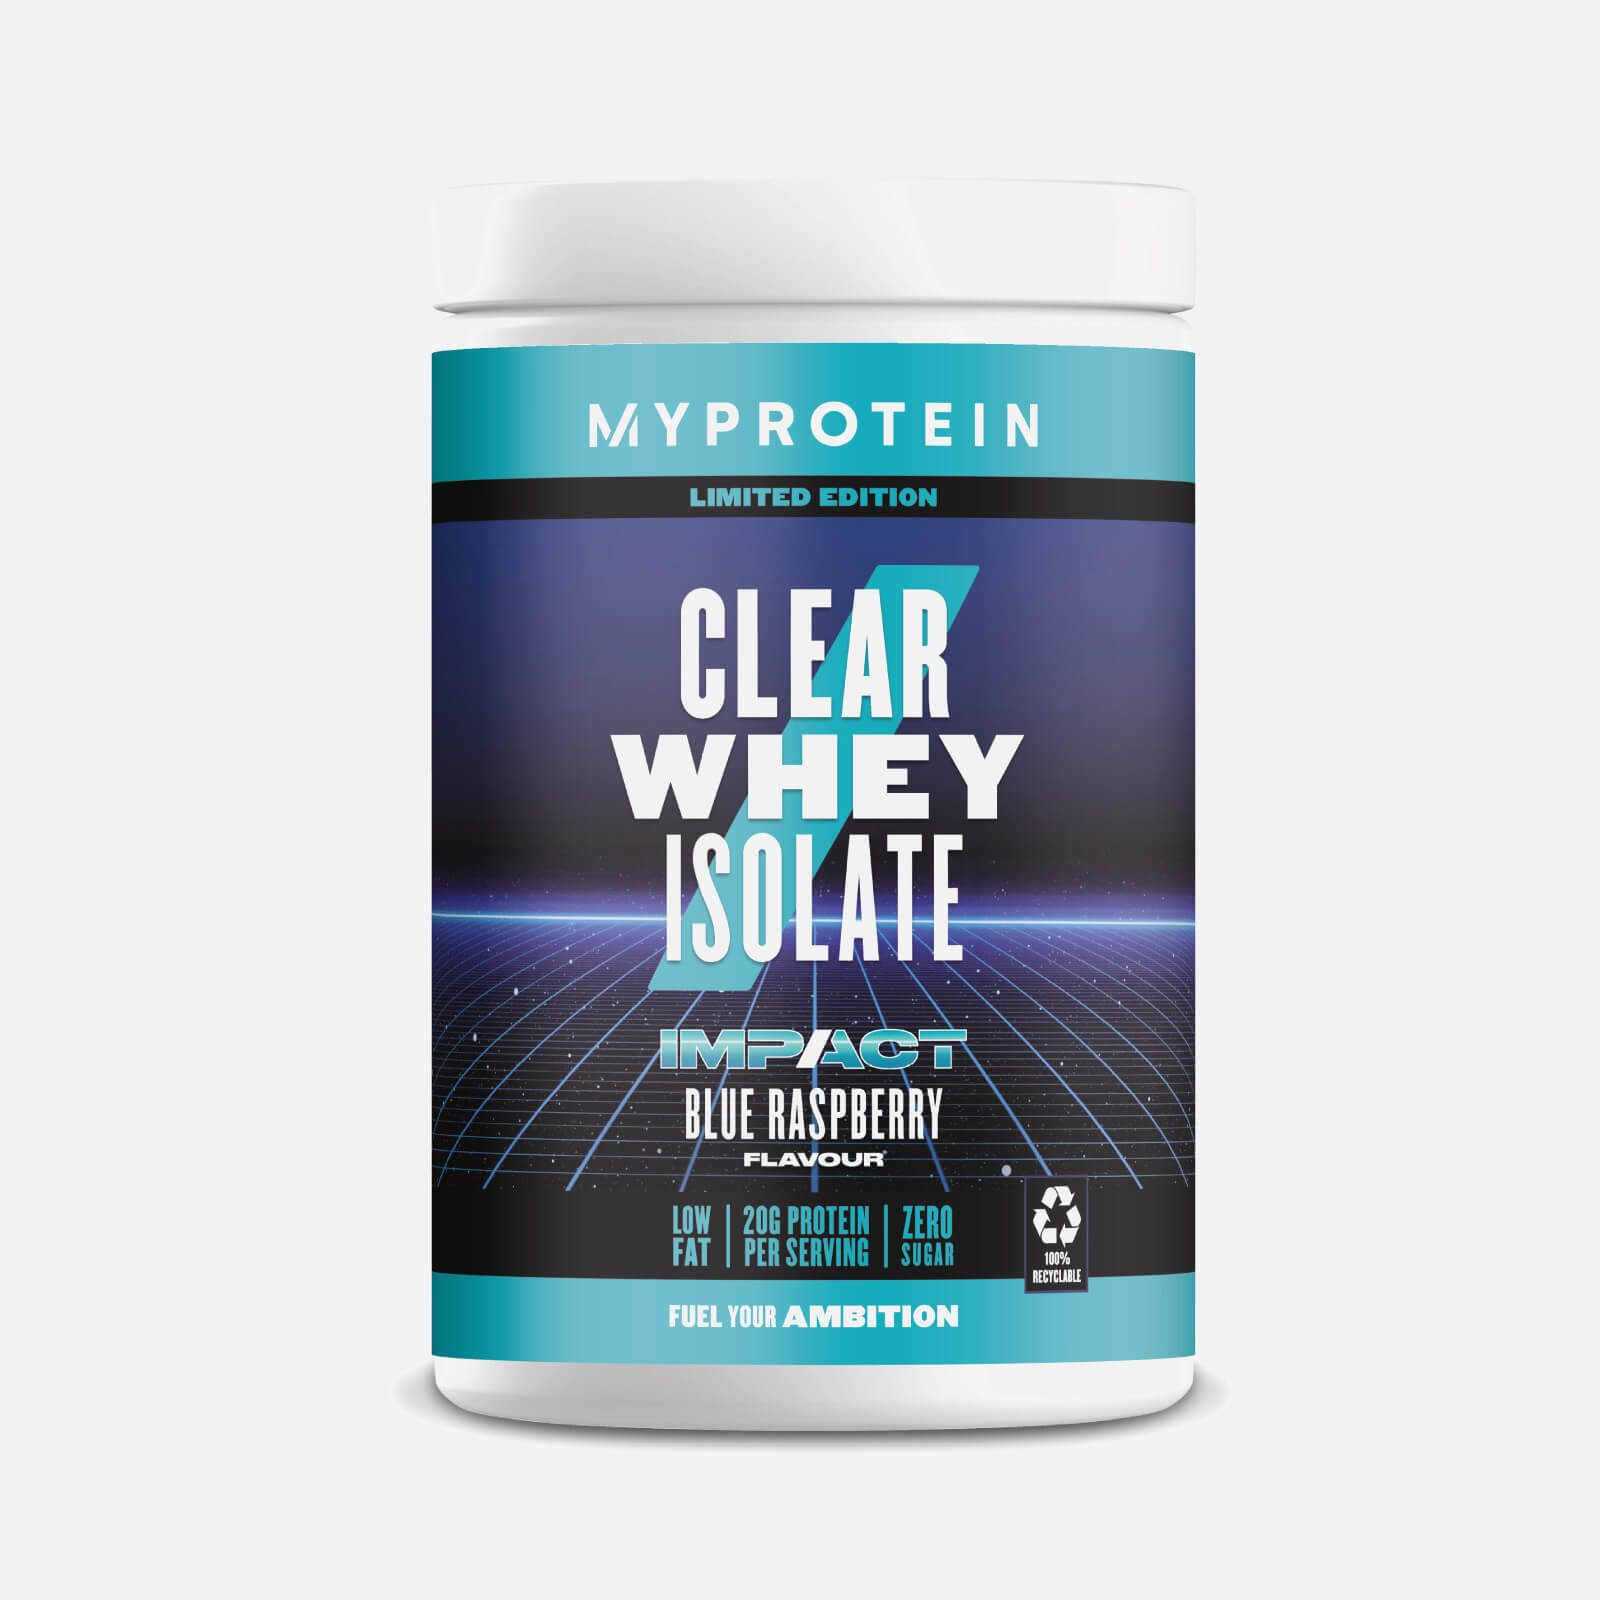 Clear Whey Isolate - Blue Raspberry (20 Servings)